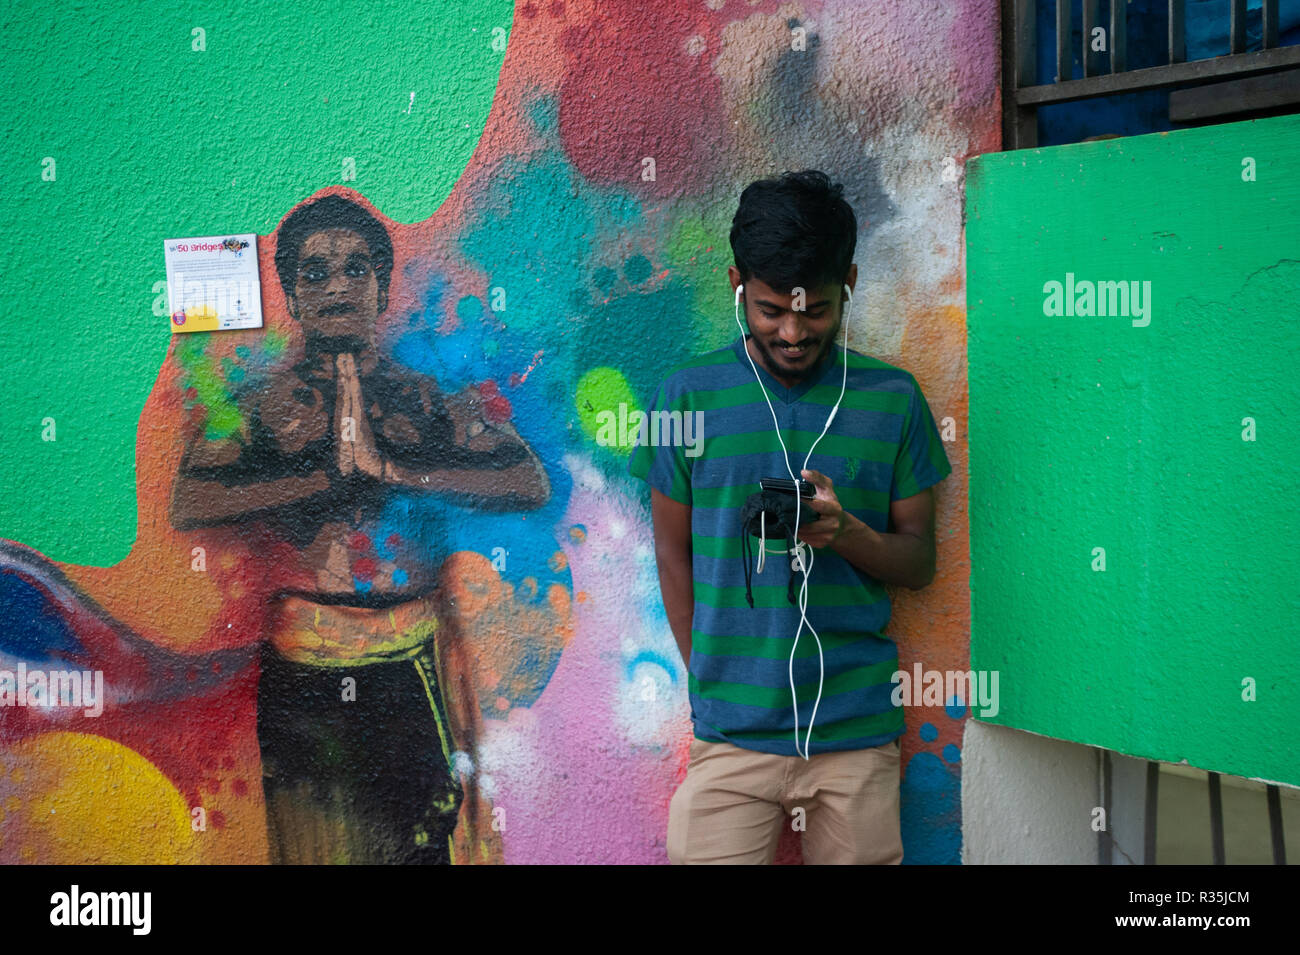 15.04.2018, Singapore, Republic of Singapore, Asia - A young man is standing in front of a colourful wall mural in Little India. Stock Photo